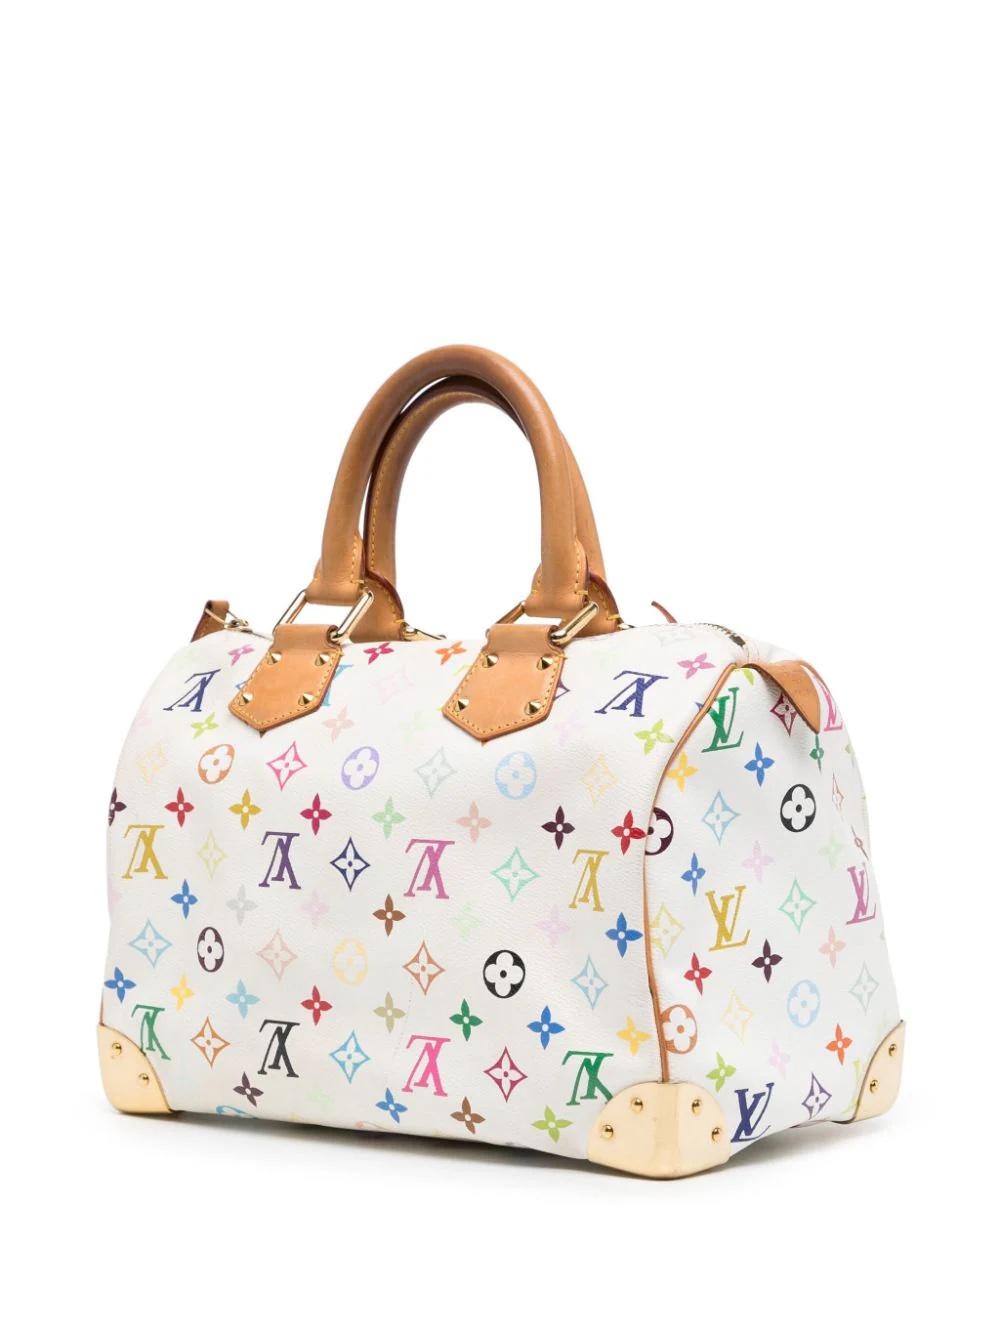 Louis Vuitton x Murakami Limited Edition Multicolour Speedy 30 Bag In Good Condition For Sale In London, GB